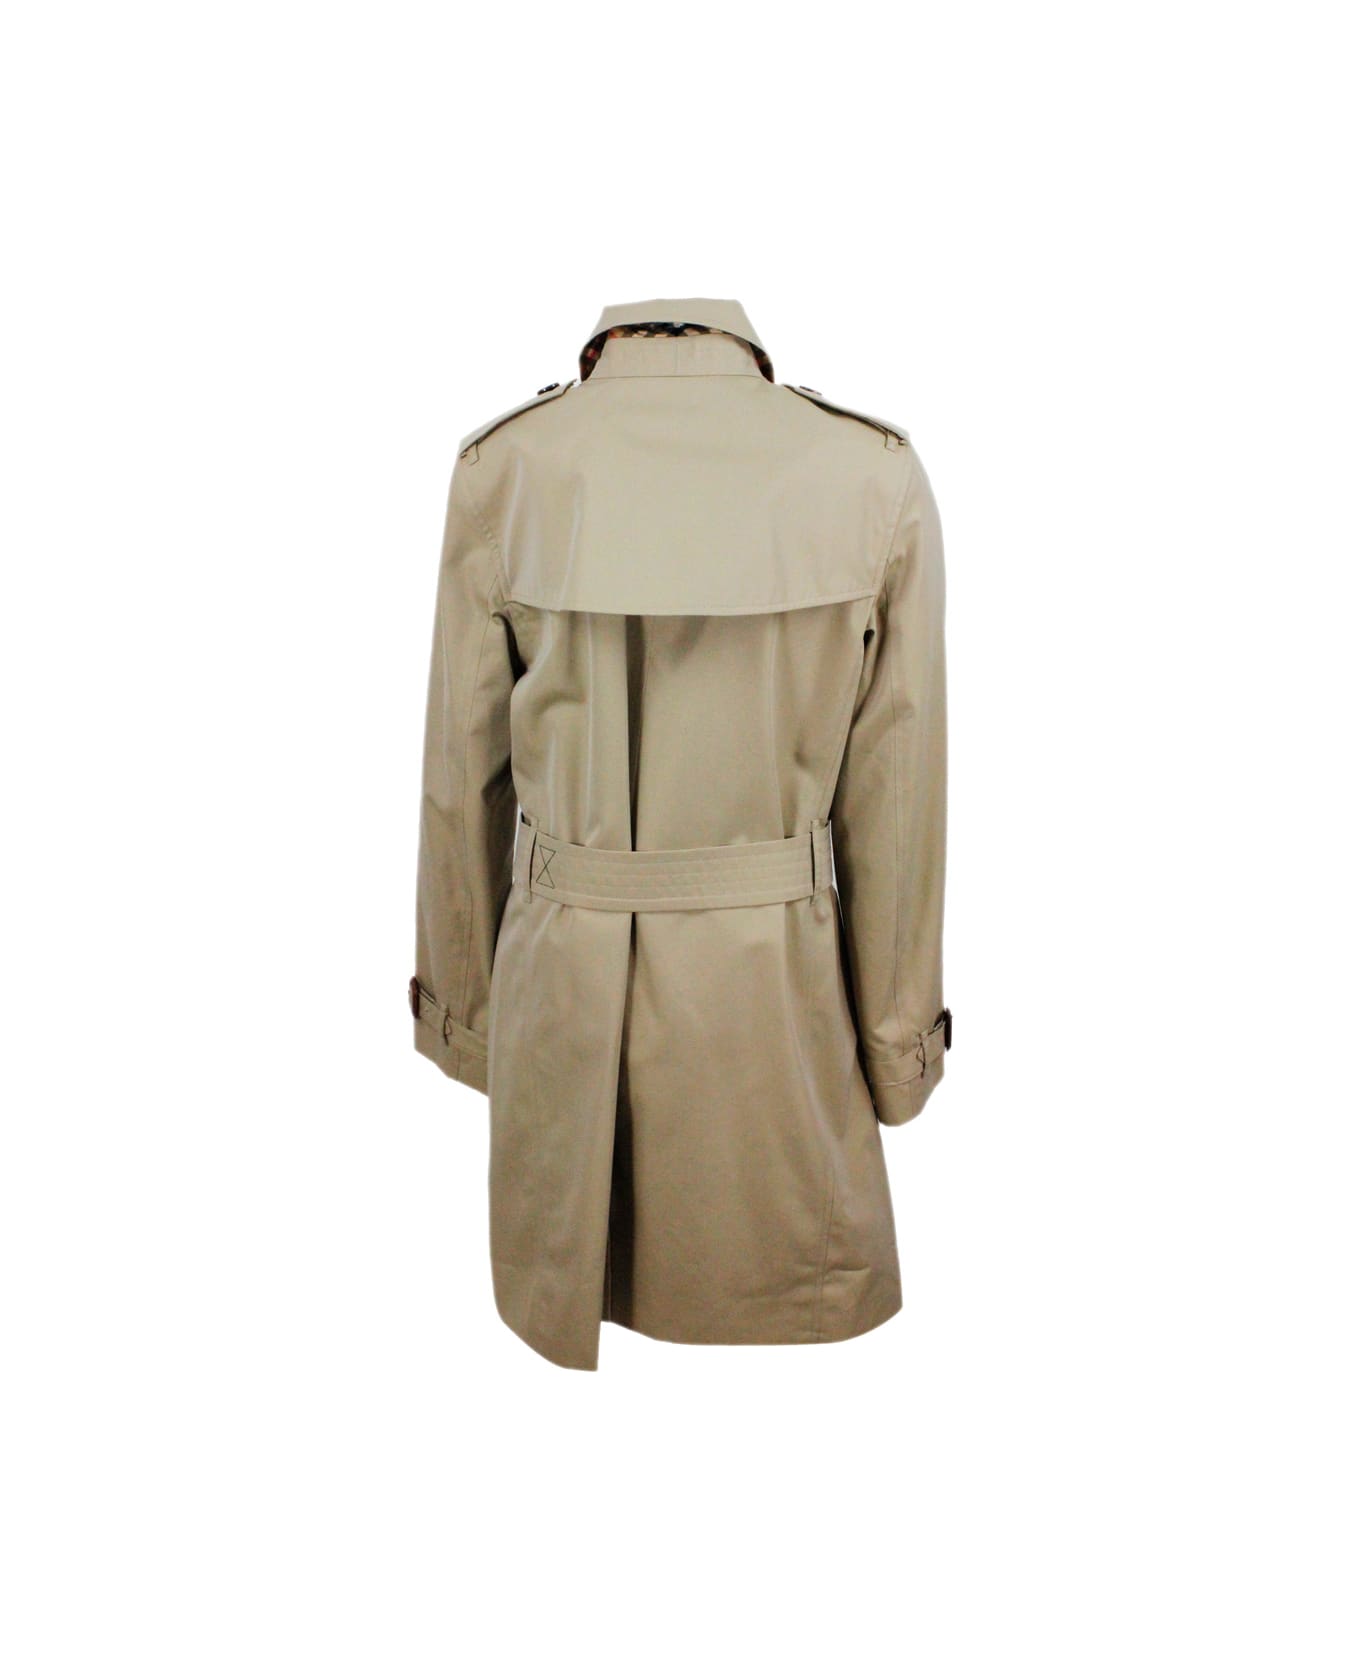 Burberry Trench Coat In Cotton Gabardine With Buttons And Belt With Check Interior - Beige